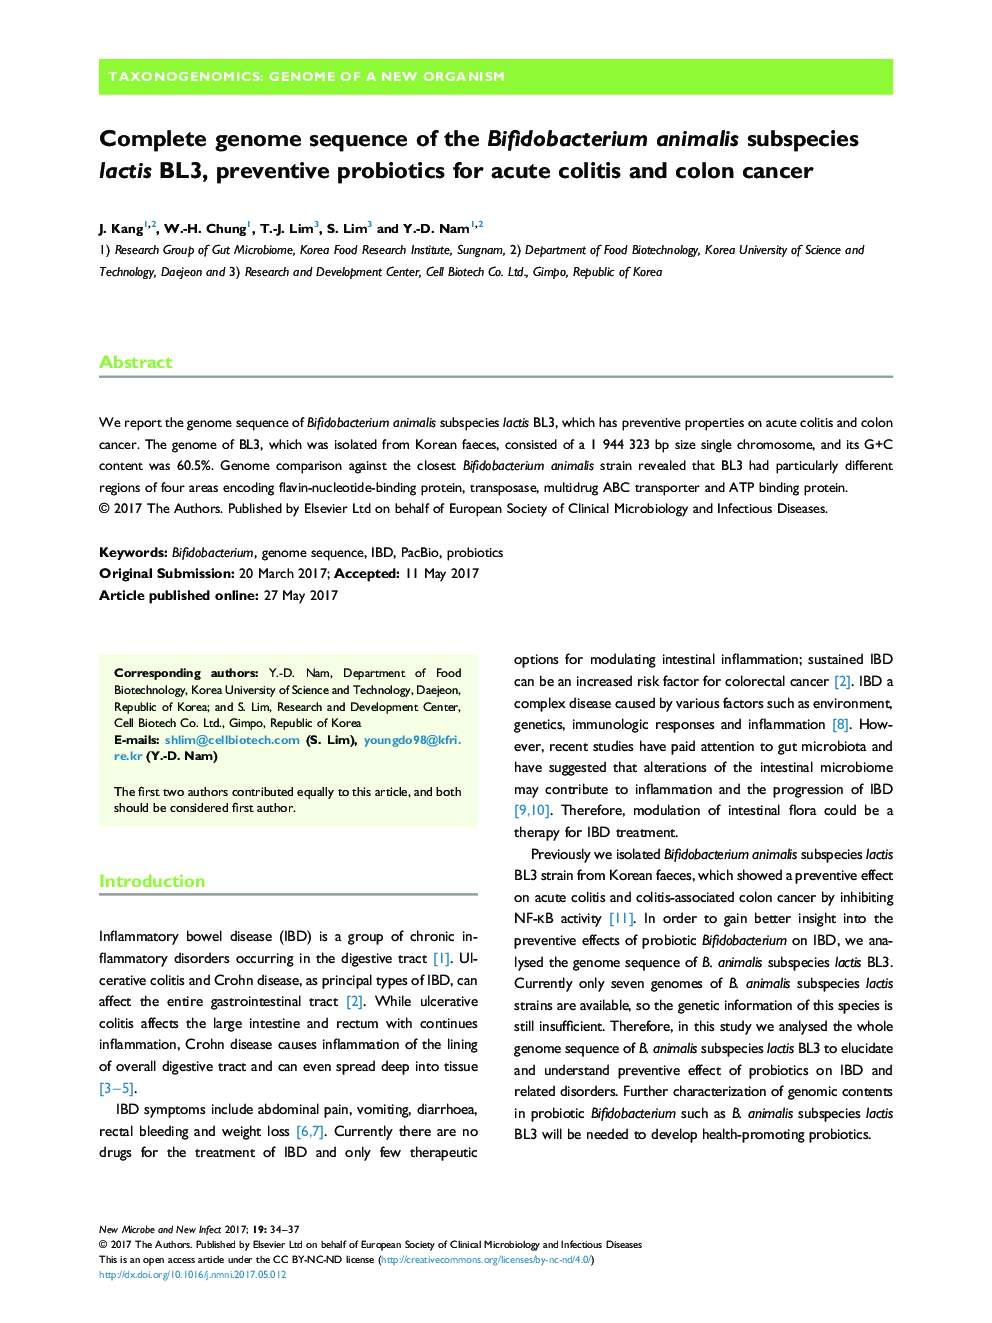 Complete genome sequence of the Bifidobacterium animalis subspecies lactis BL3, preventive probiotics for acute colitis and colon cancer